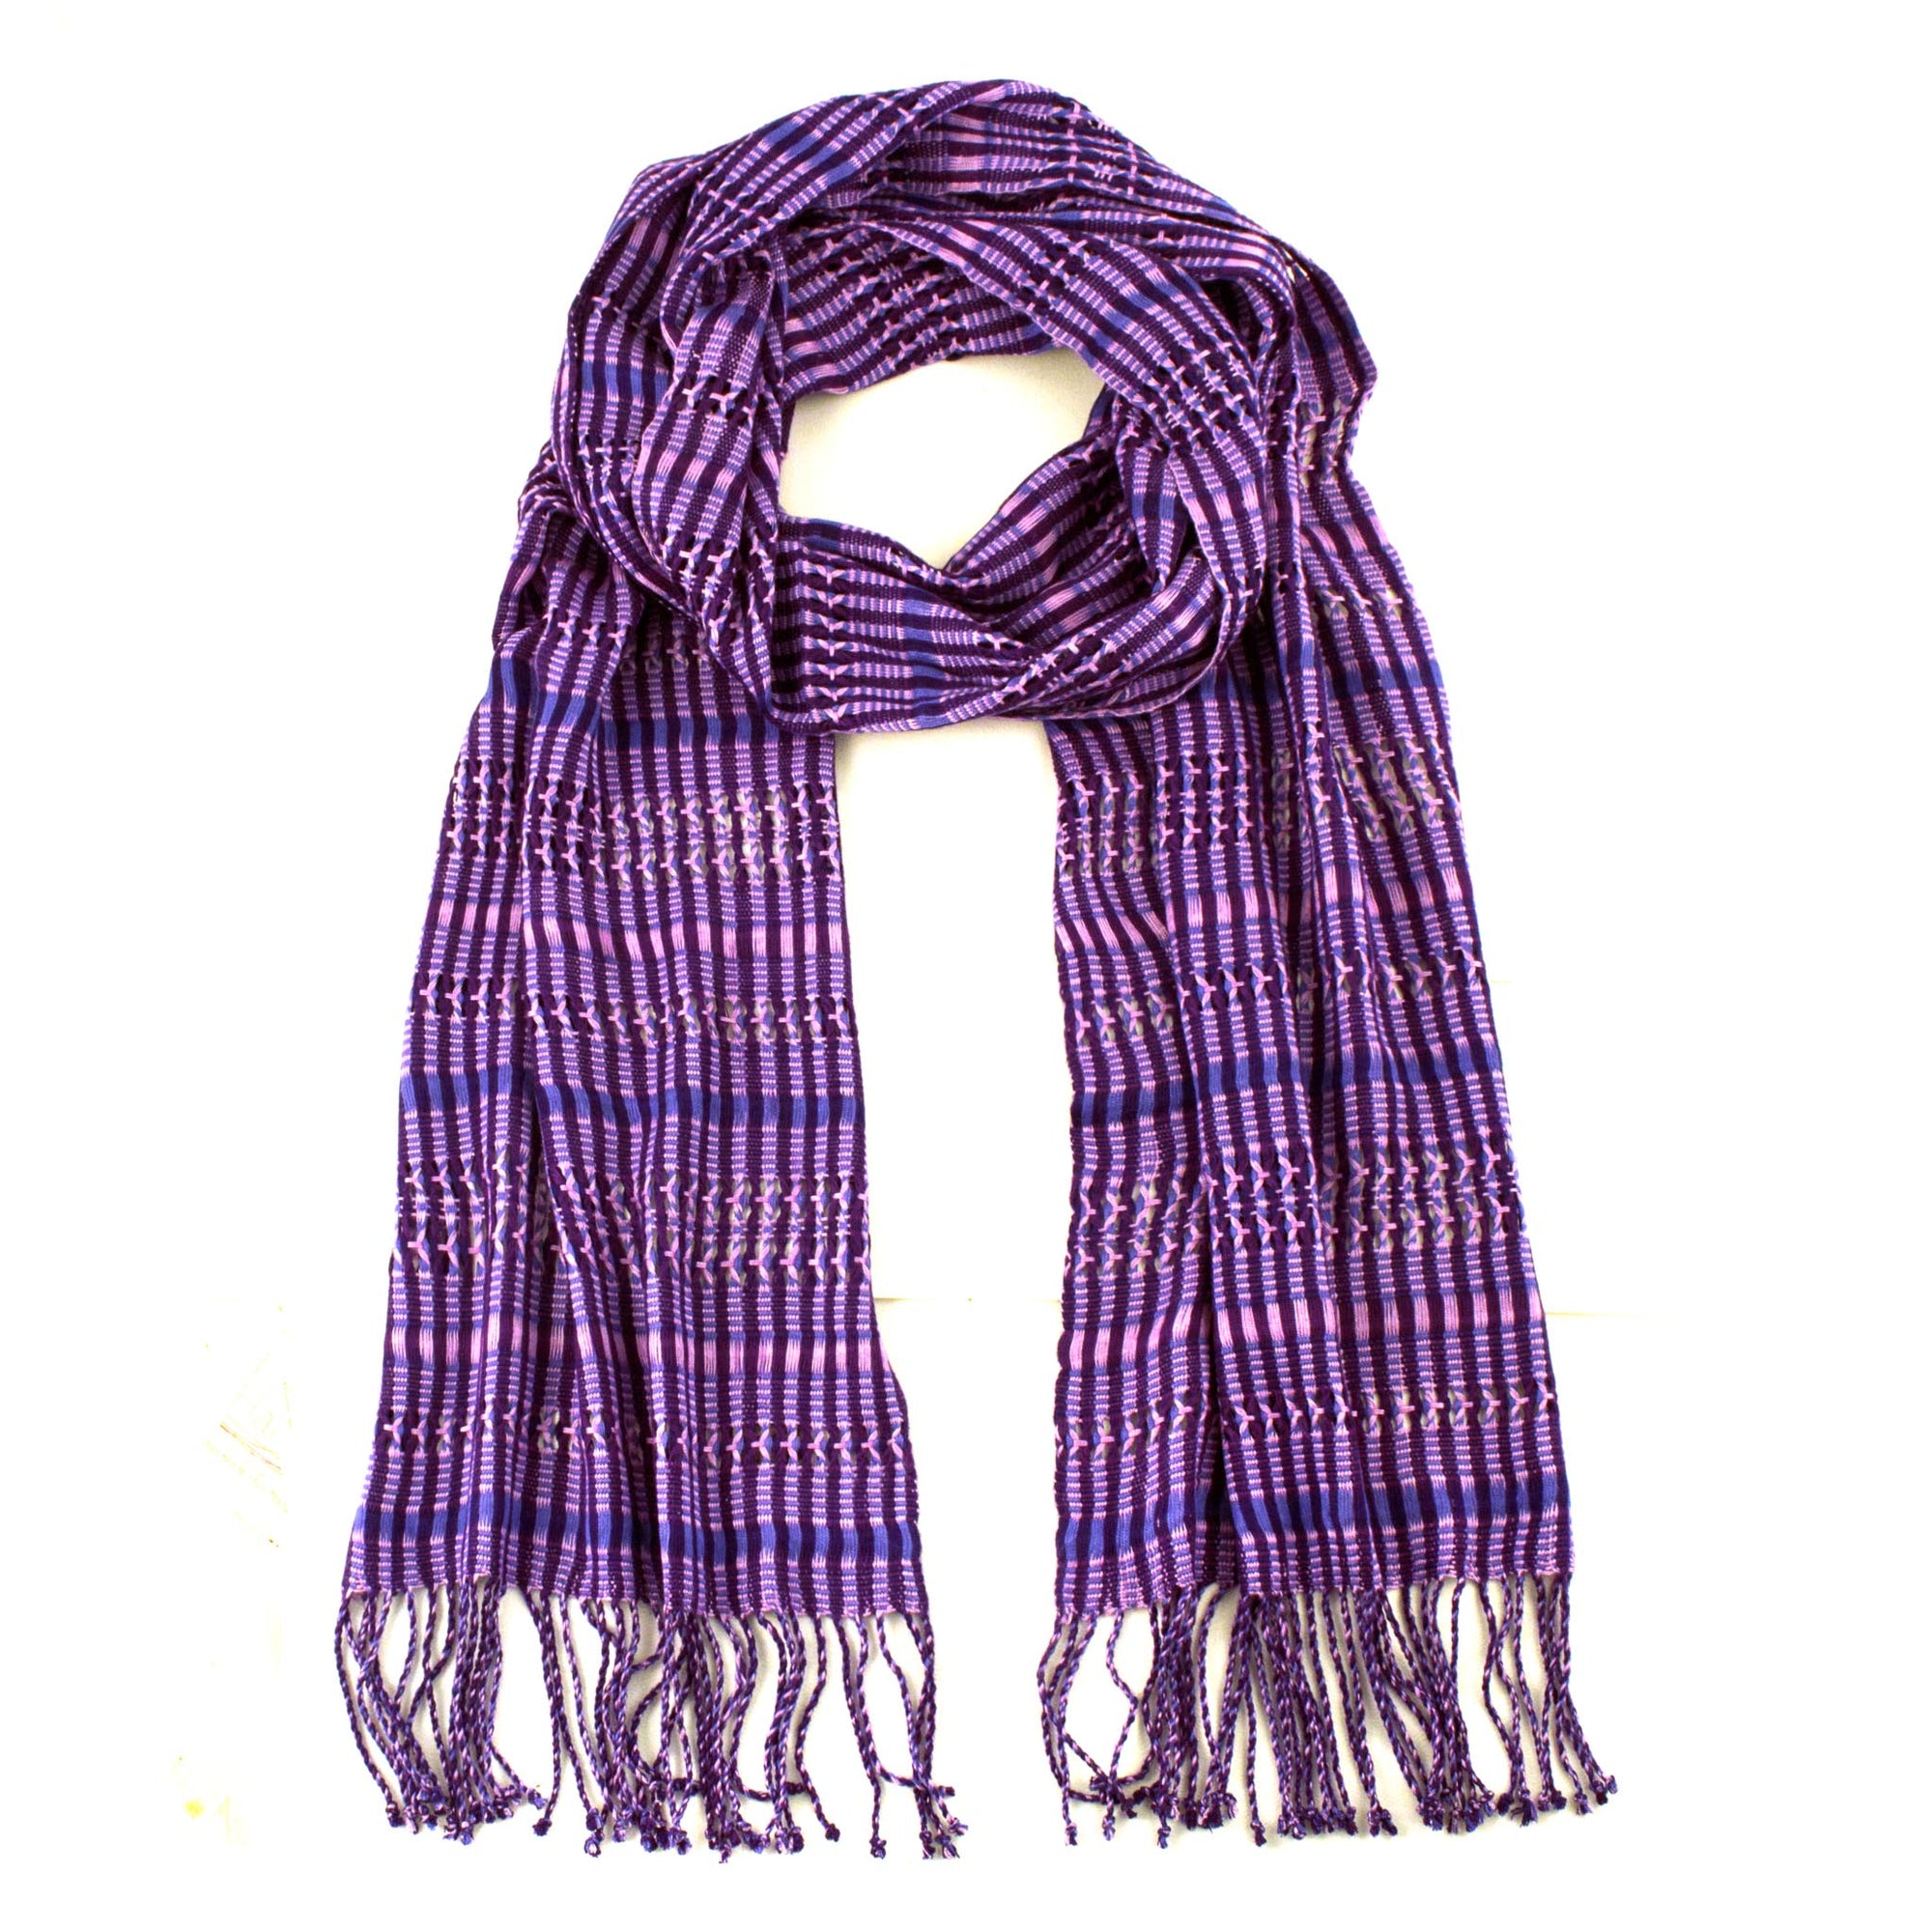 Linda Scarf in Violet, woven from rayon threads in purple and navy tones, with twisted fringe. The scarf is laid flat, wrapped with a circle on white background.